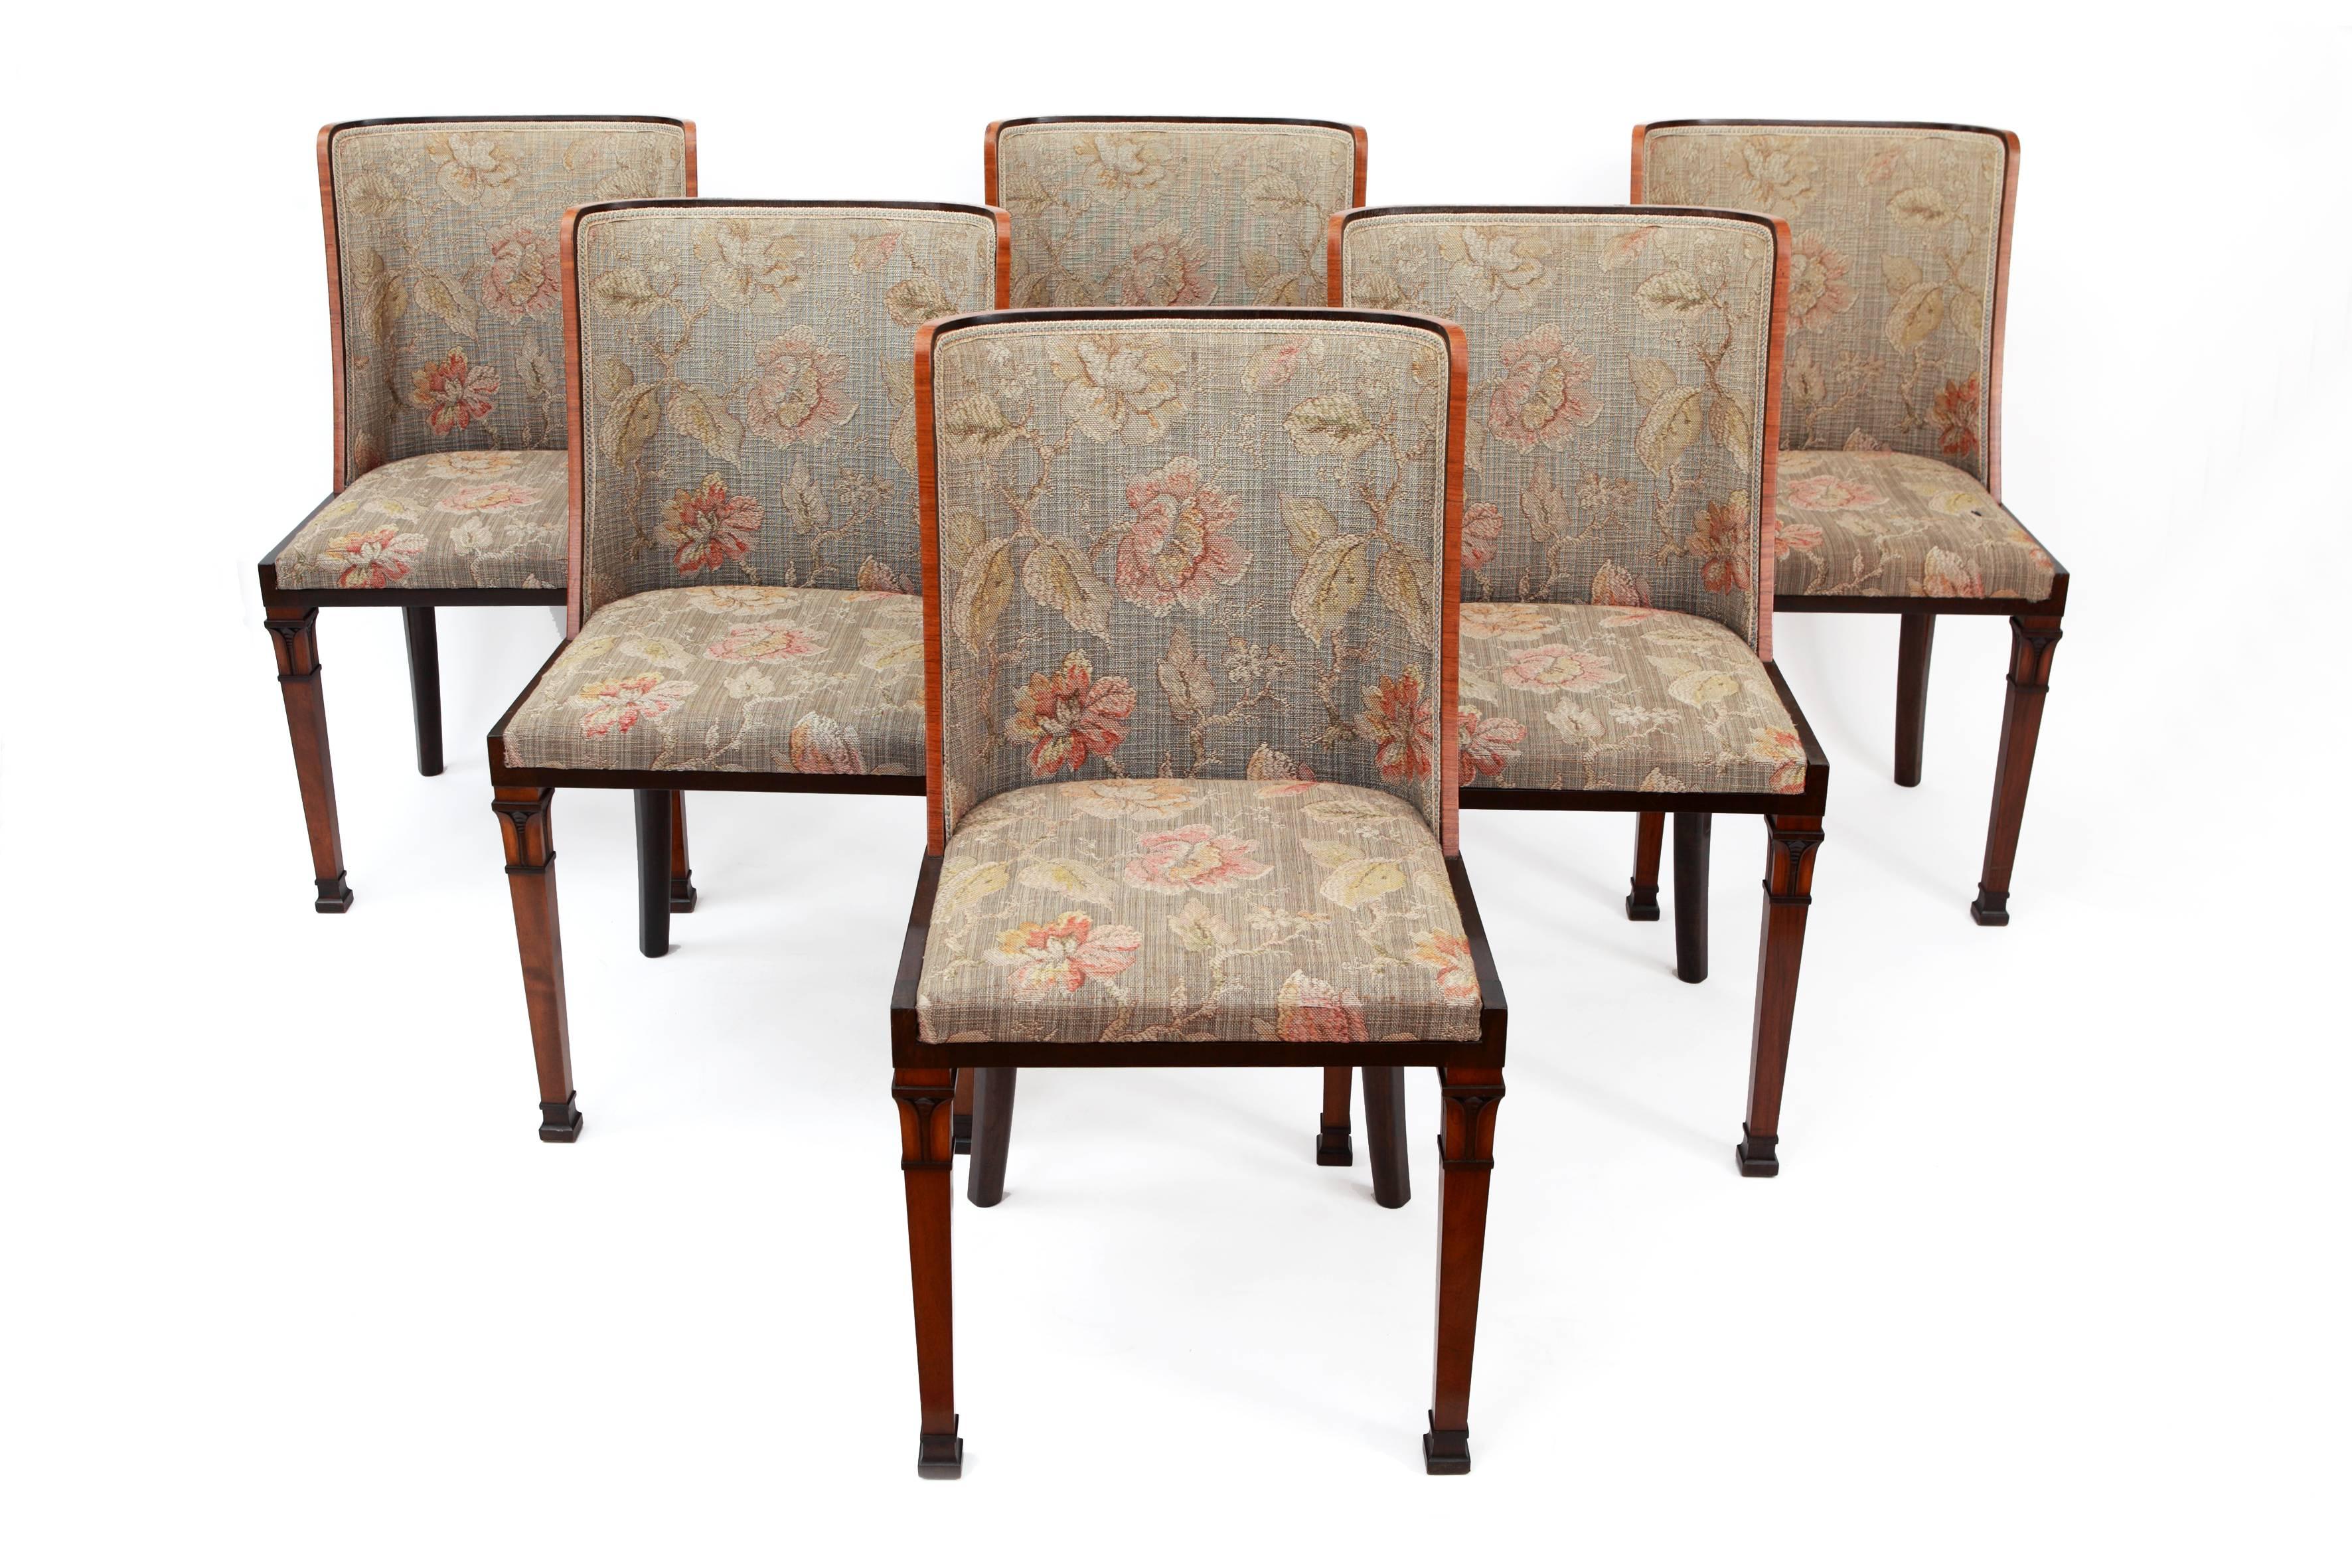 Various types of wood for the geometrical, classicized designs of the back rest and carved supports. Upholstery in fabric with floral design
Total H. 85 cm, H. seat 46 cm, W. 46 cm, D. 42 cm

These six dining chairs could be the work of Carl